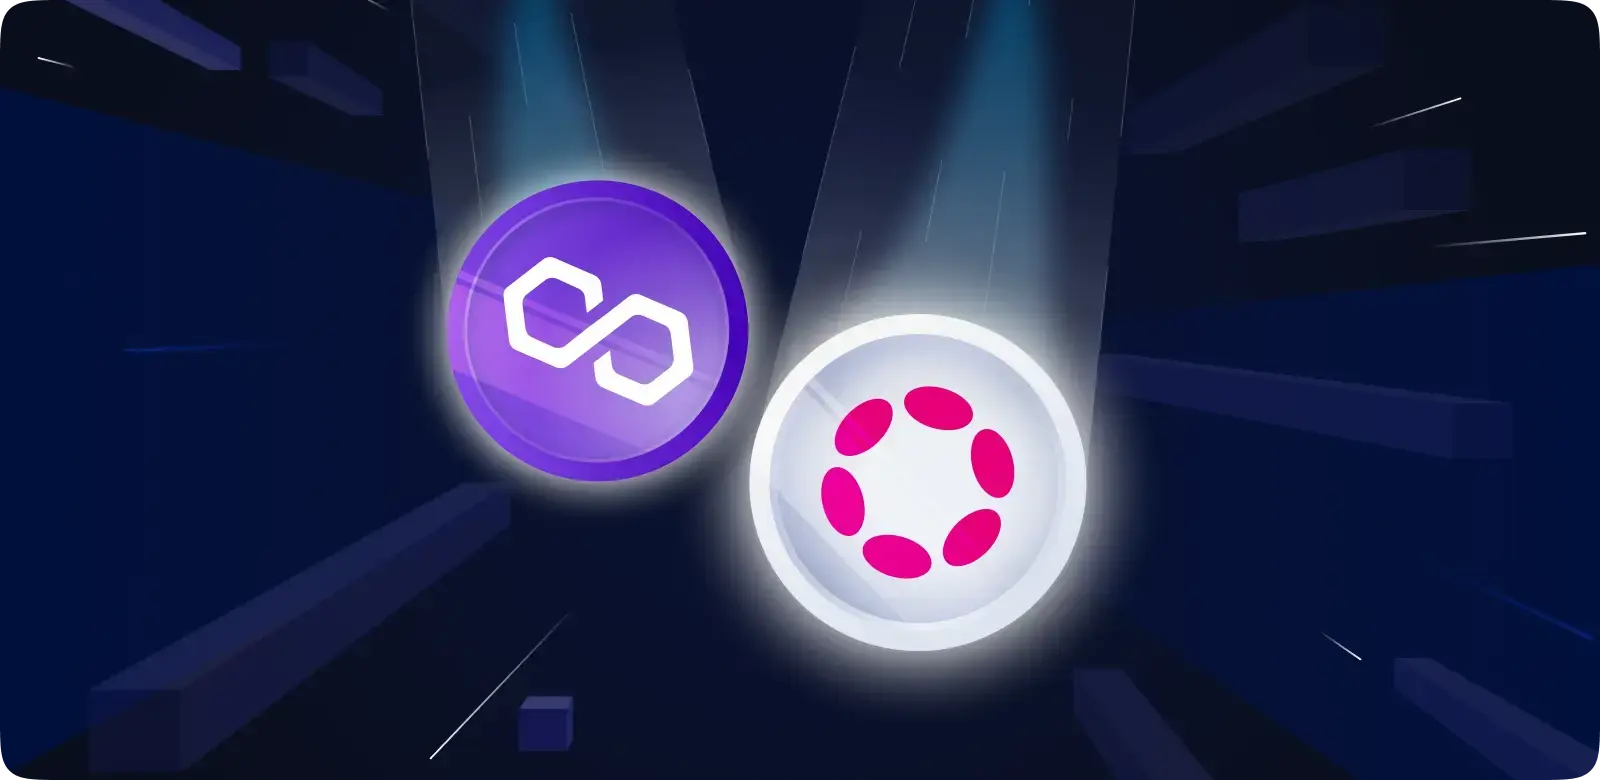 Raboo Set to Eclipse Polkadot and Polygon in Crypto Revolution